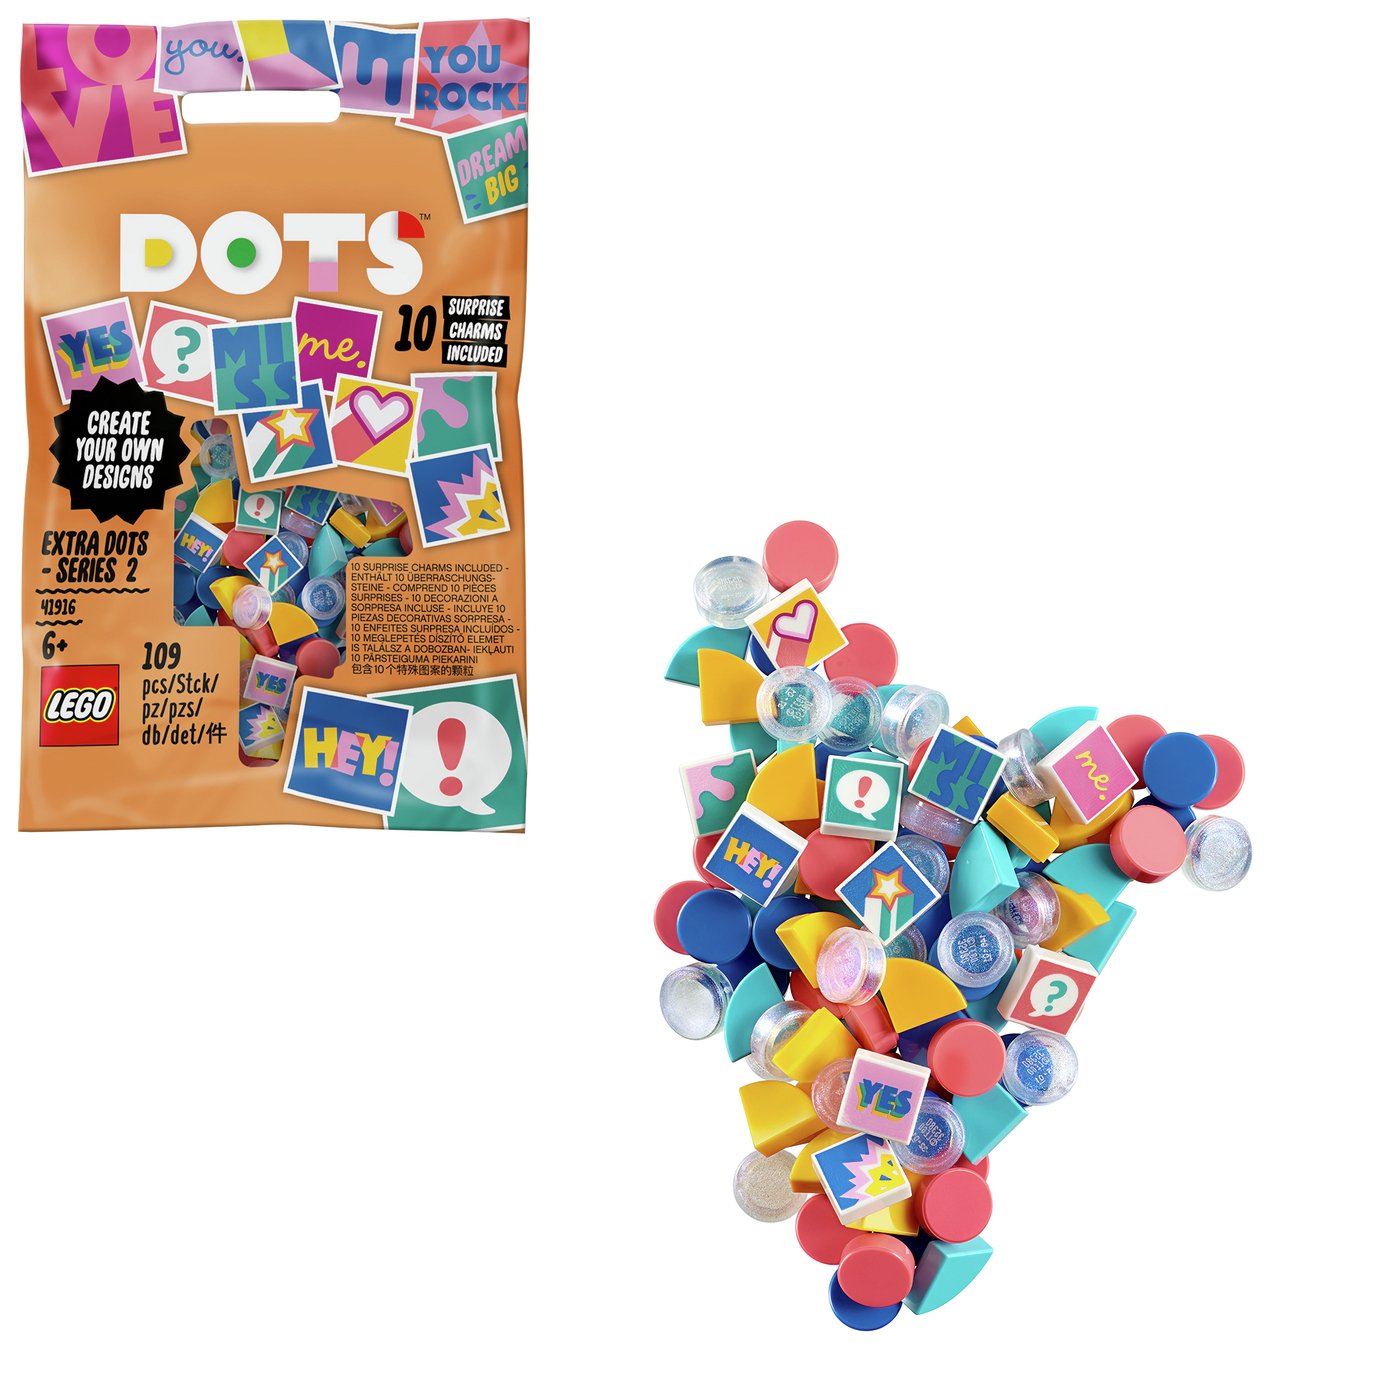 LEGO DOTS Extra DOTS Review